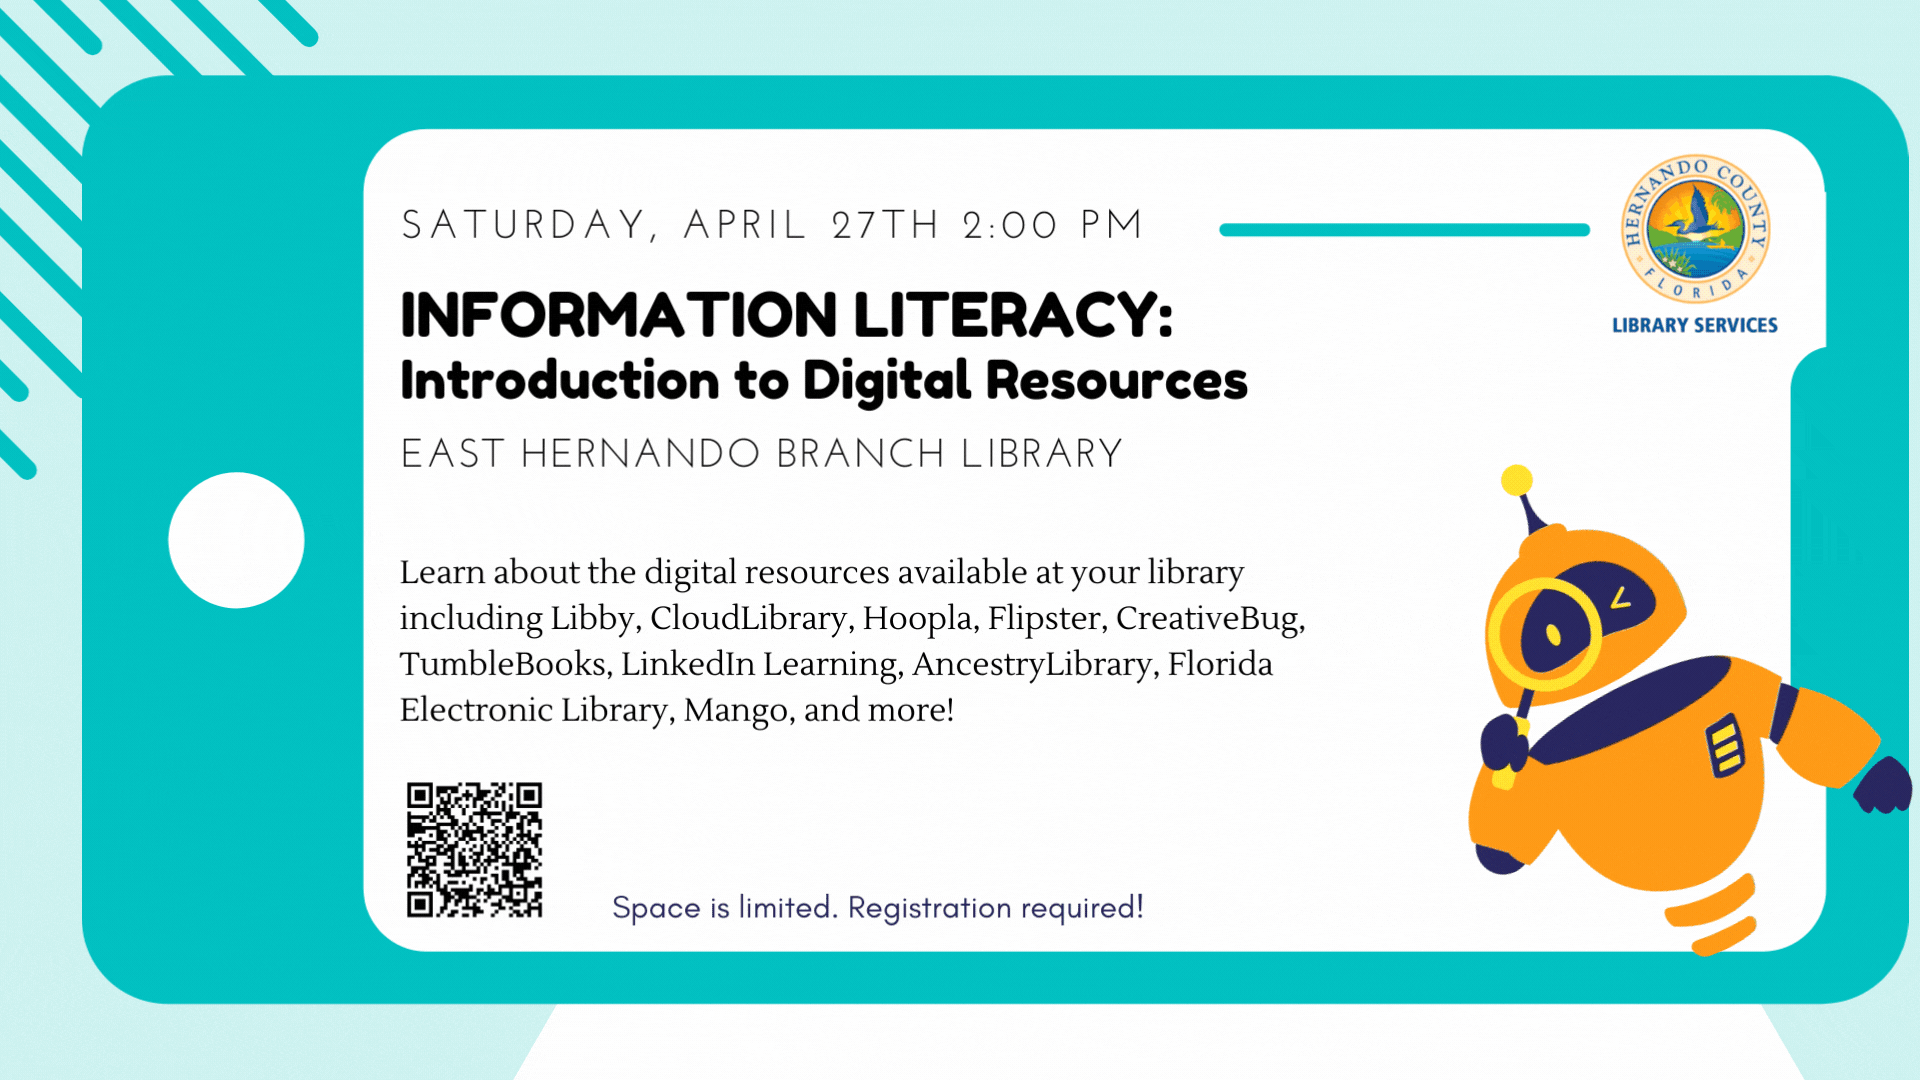 Introduction to Digital Resources